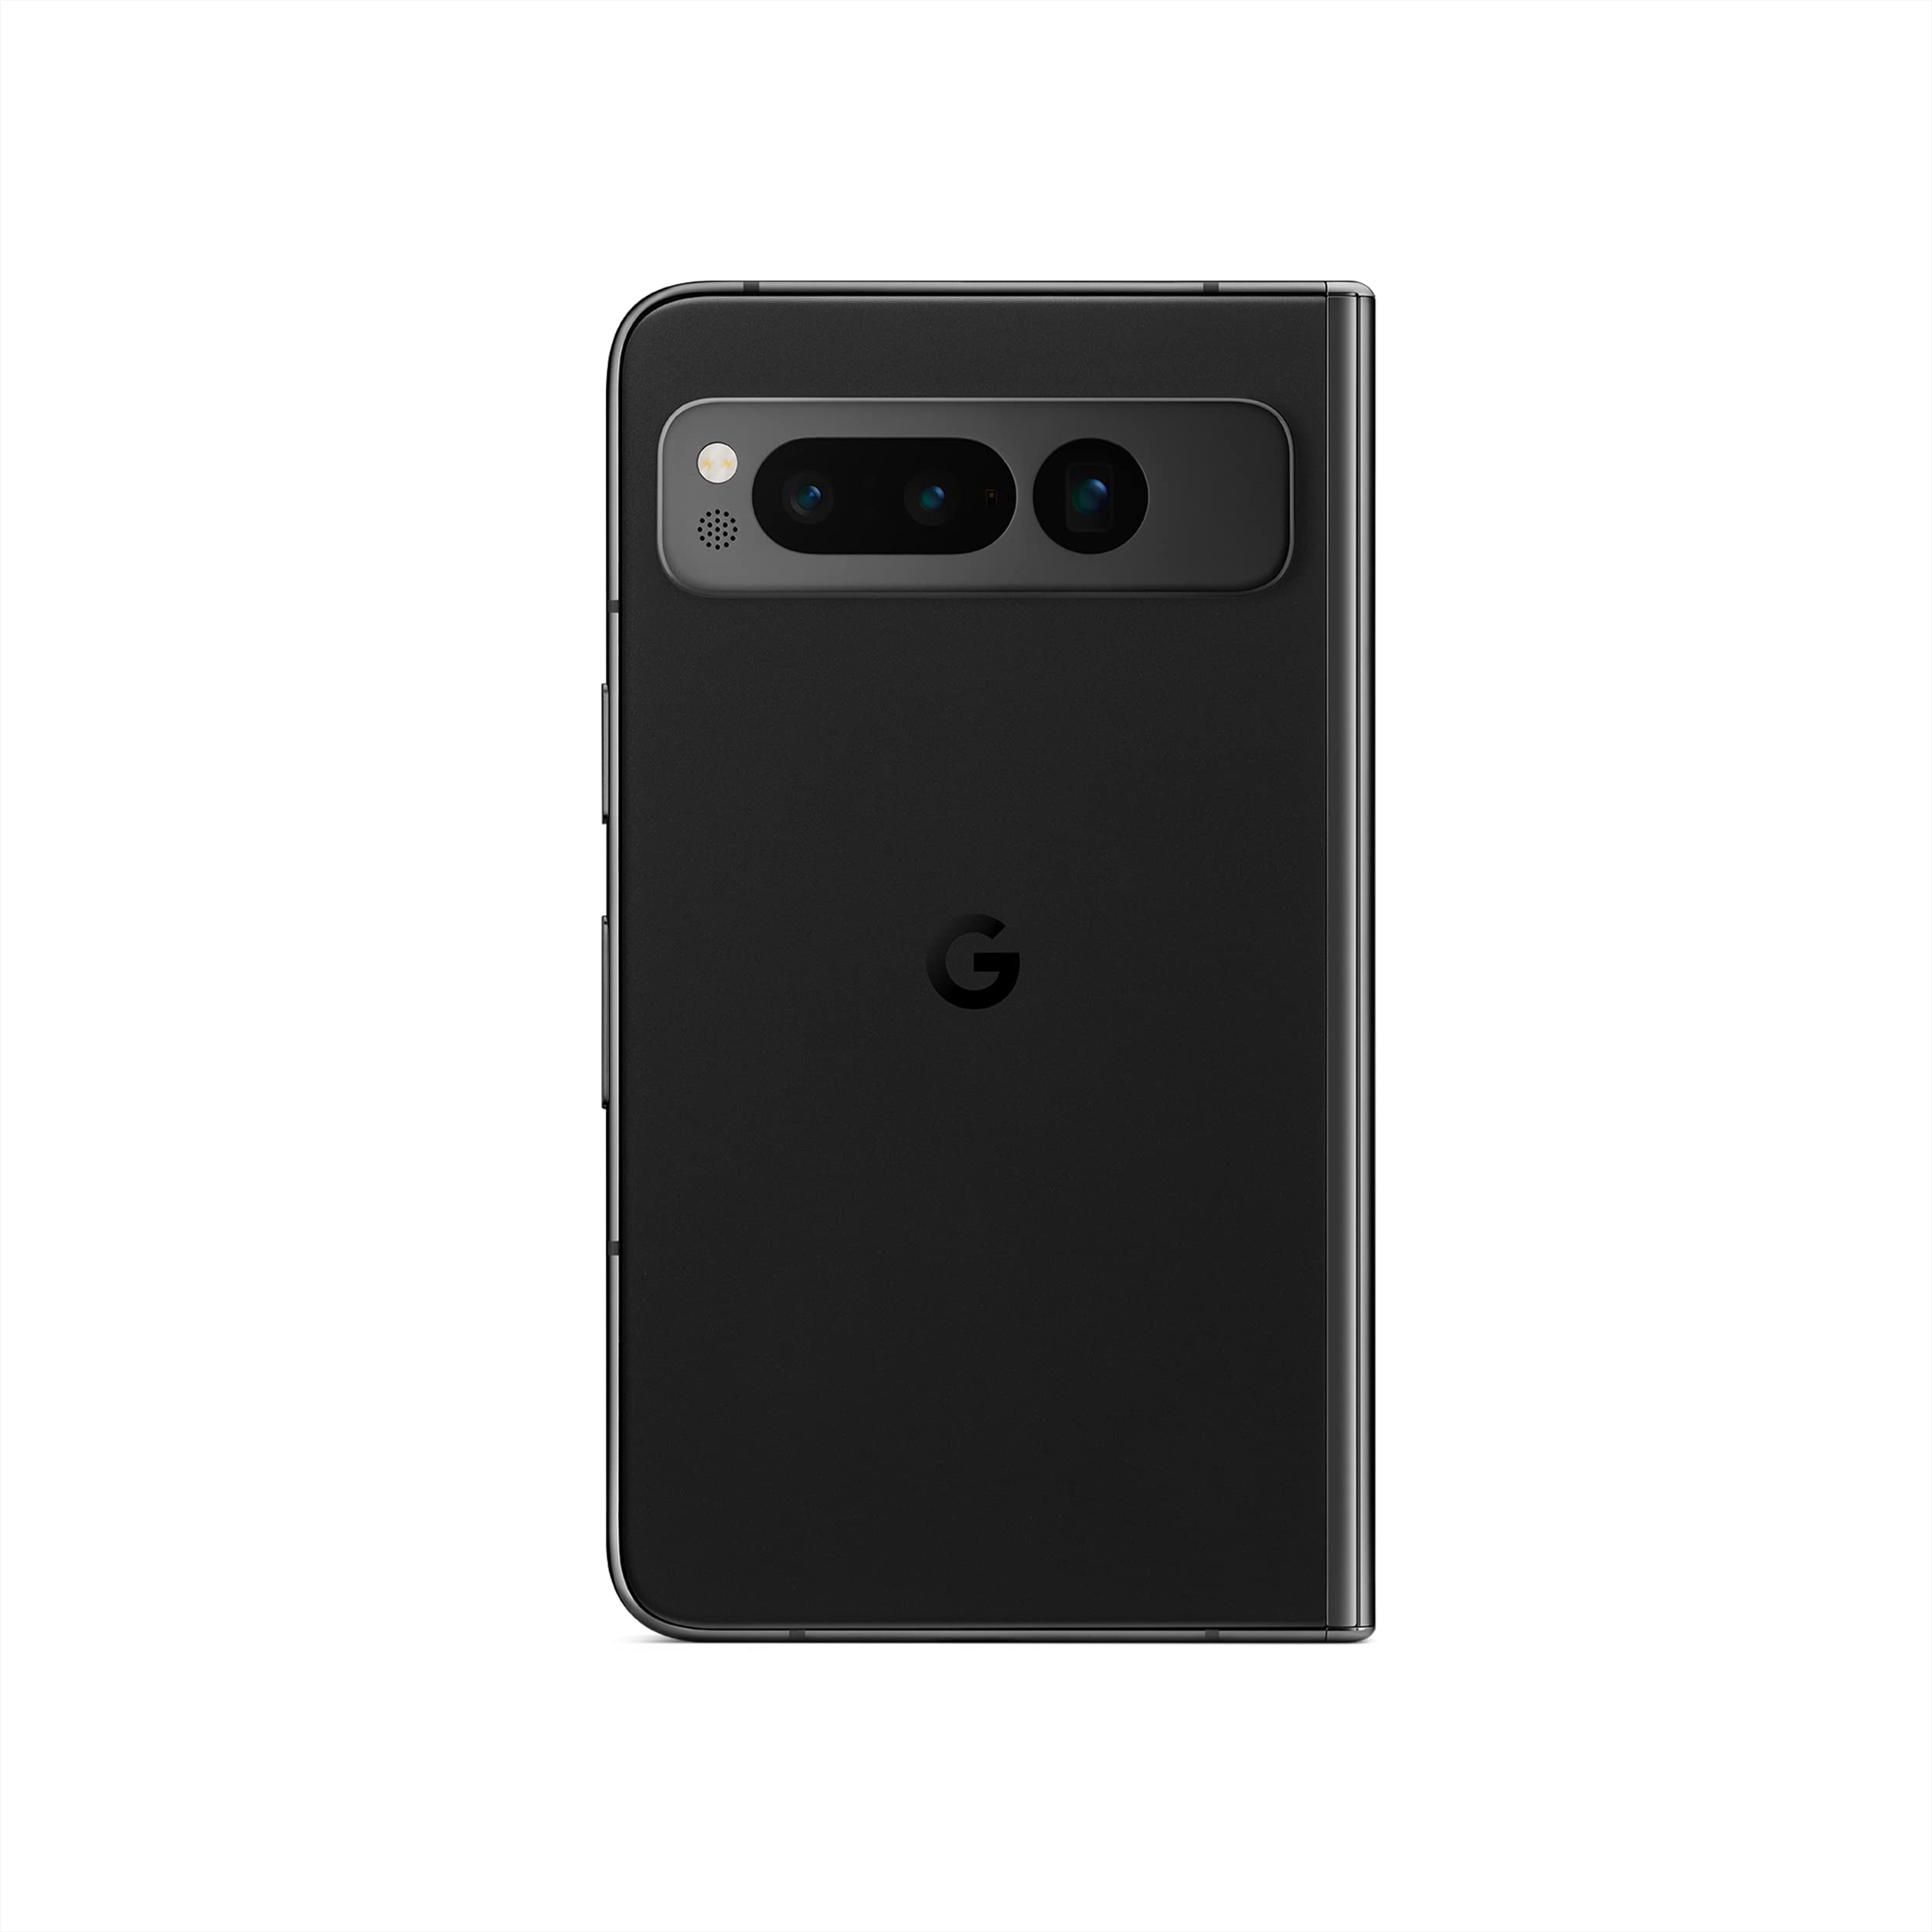 Google Pixel Fold - Unlocked Android 5G Smartphone with Telephoto Lens and Ultrawide Lens - Foldable Display - 24-Hour Battery - Obsidian - 512 GB